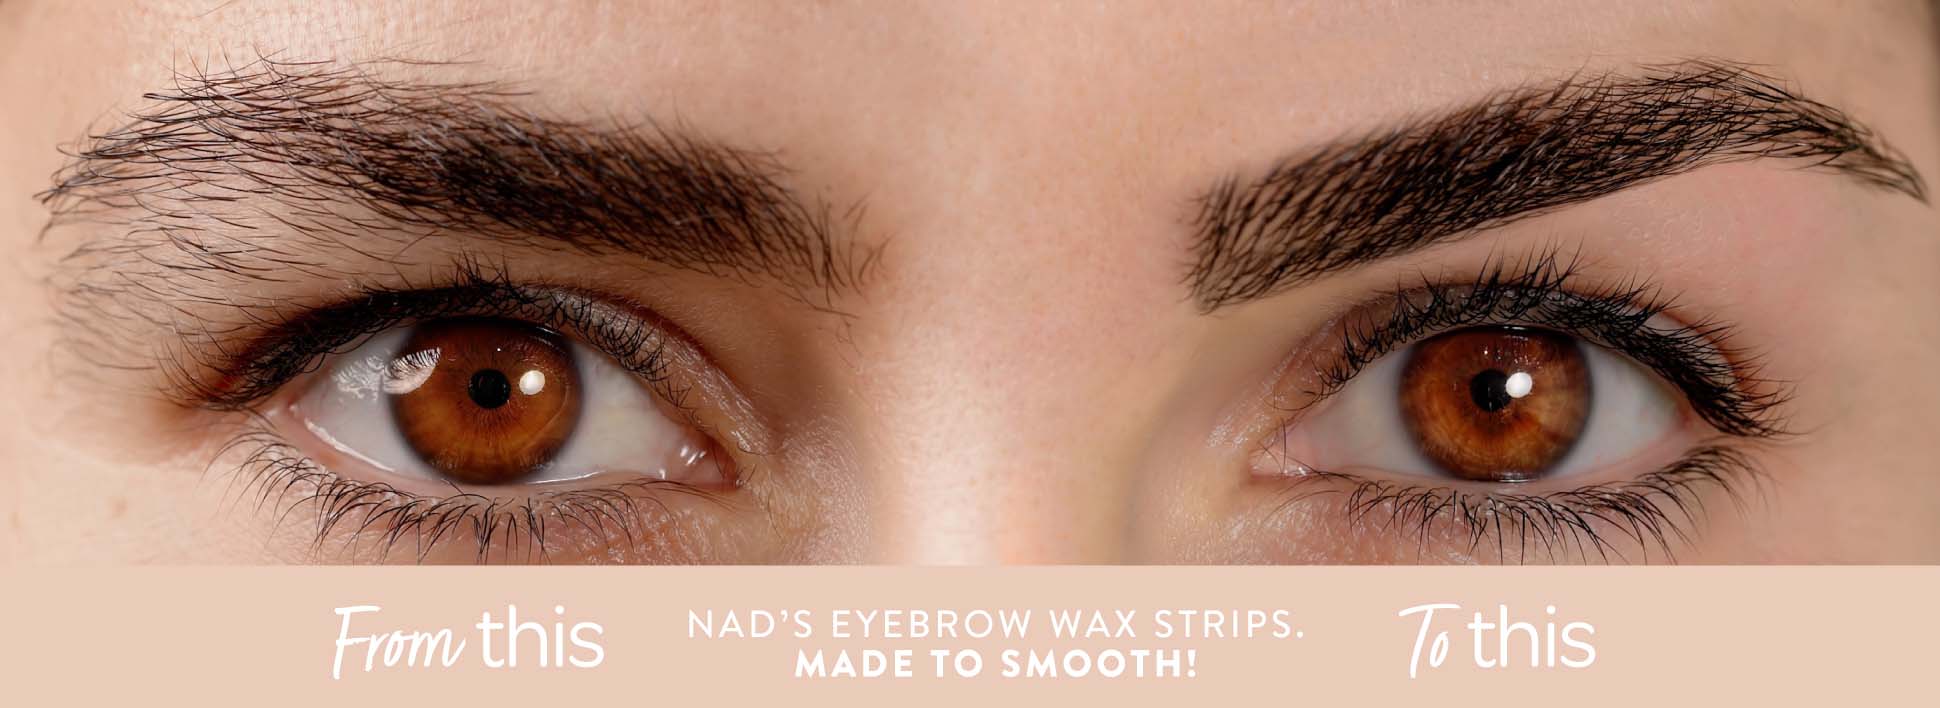 Nads Hair Removal Eyebrow Wax Strips | Buy Now